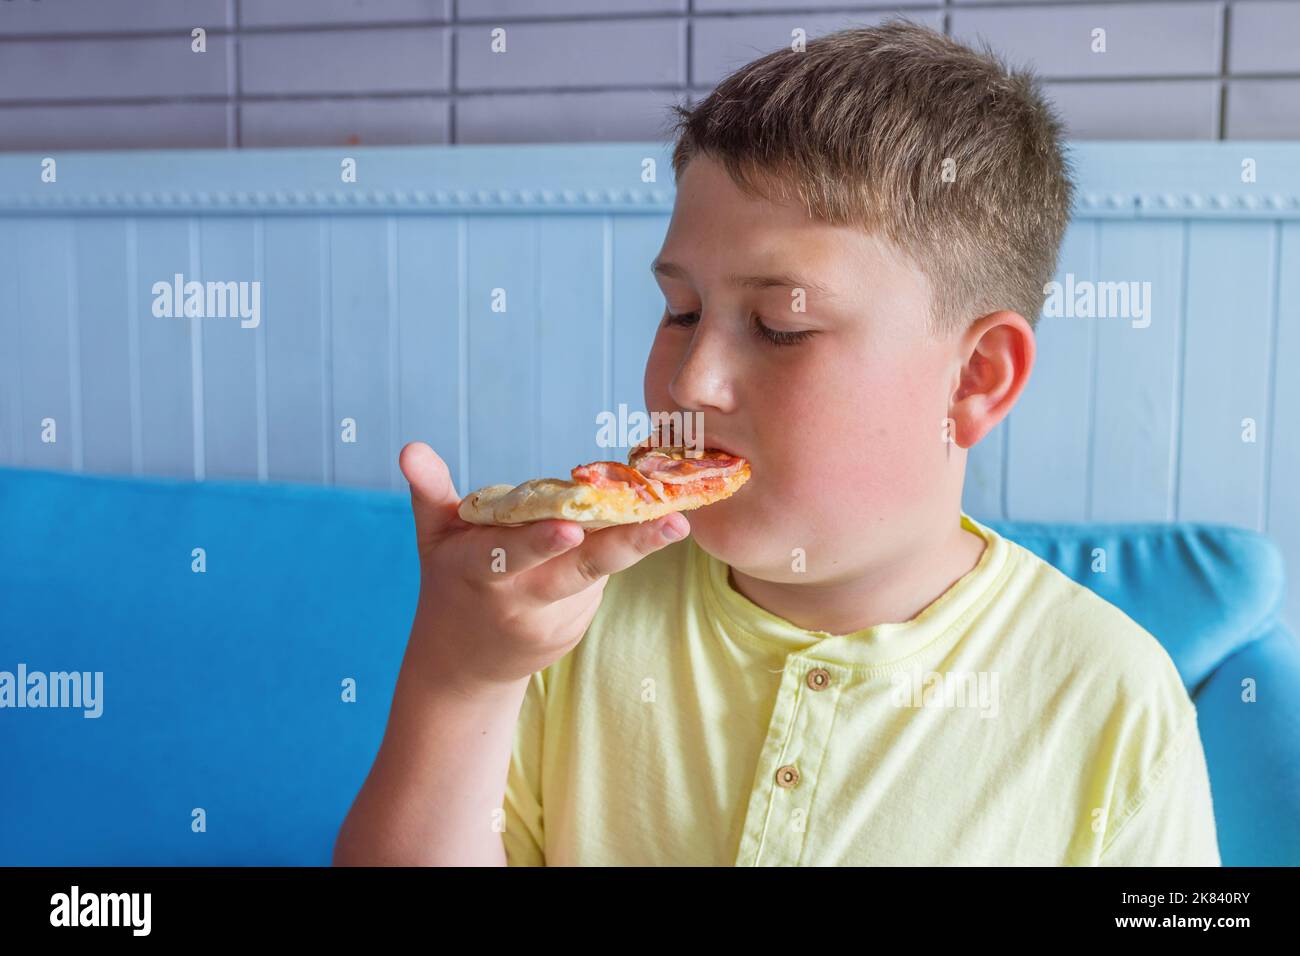 The boy enjoys eating pizza. Concept - Obesity and unhealthy diet Stock Photo